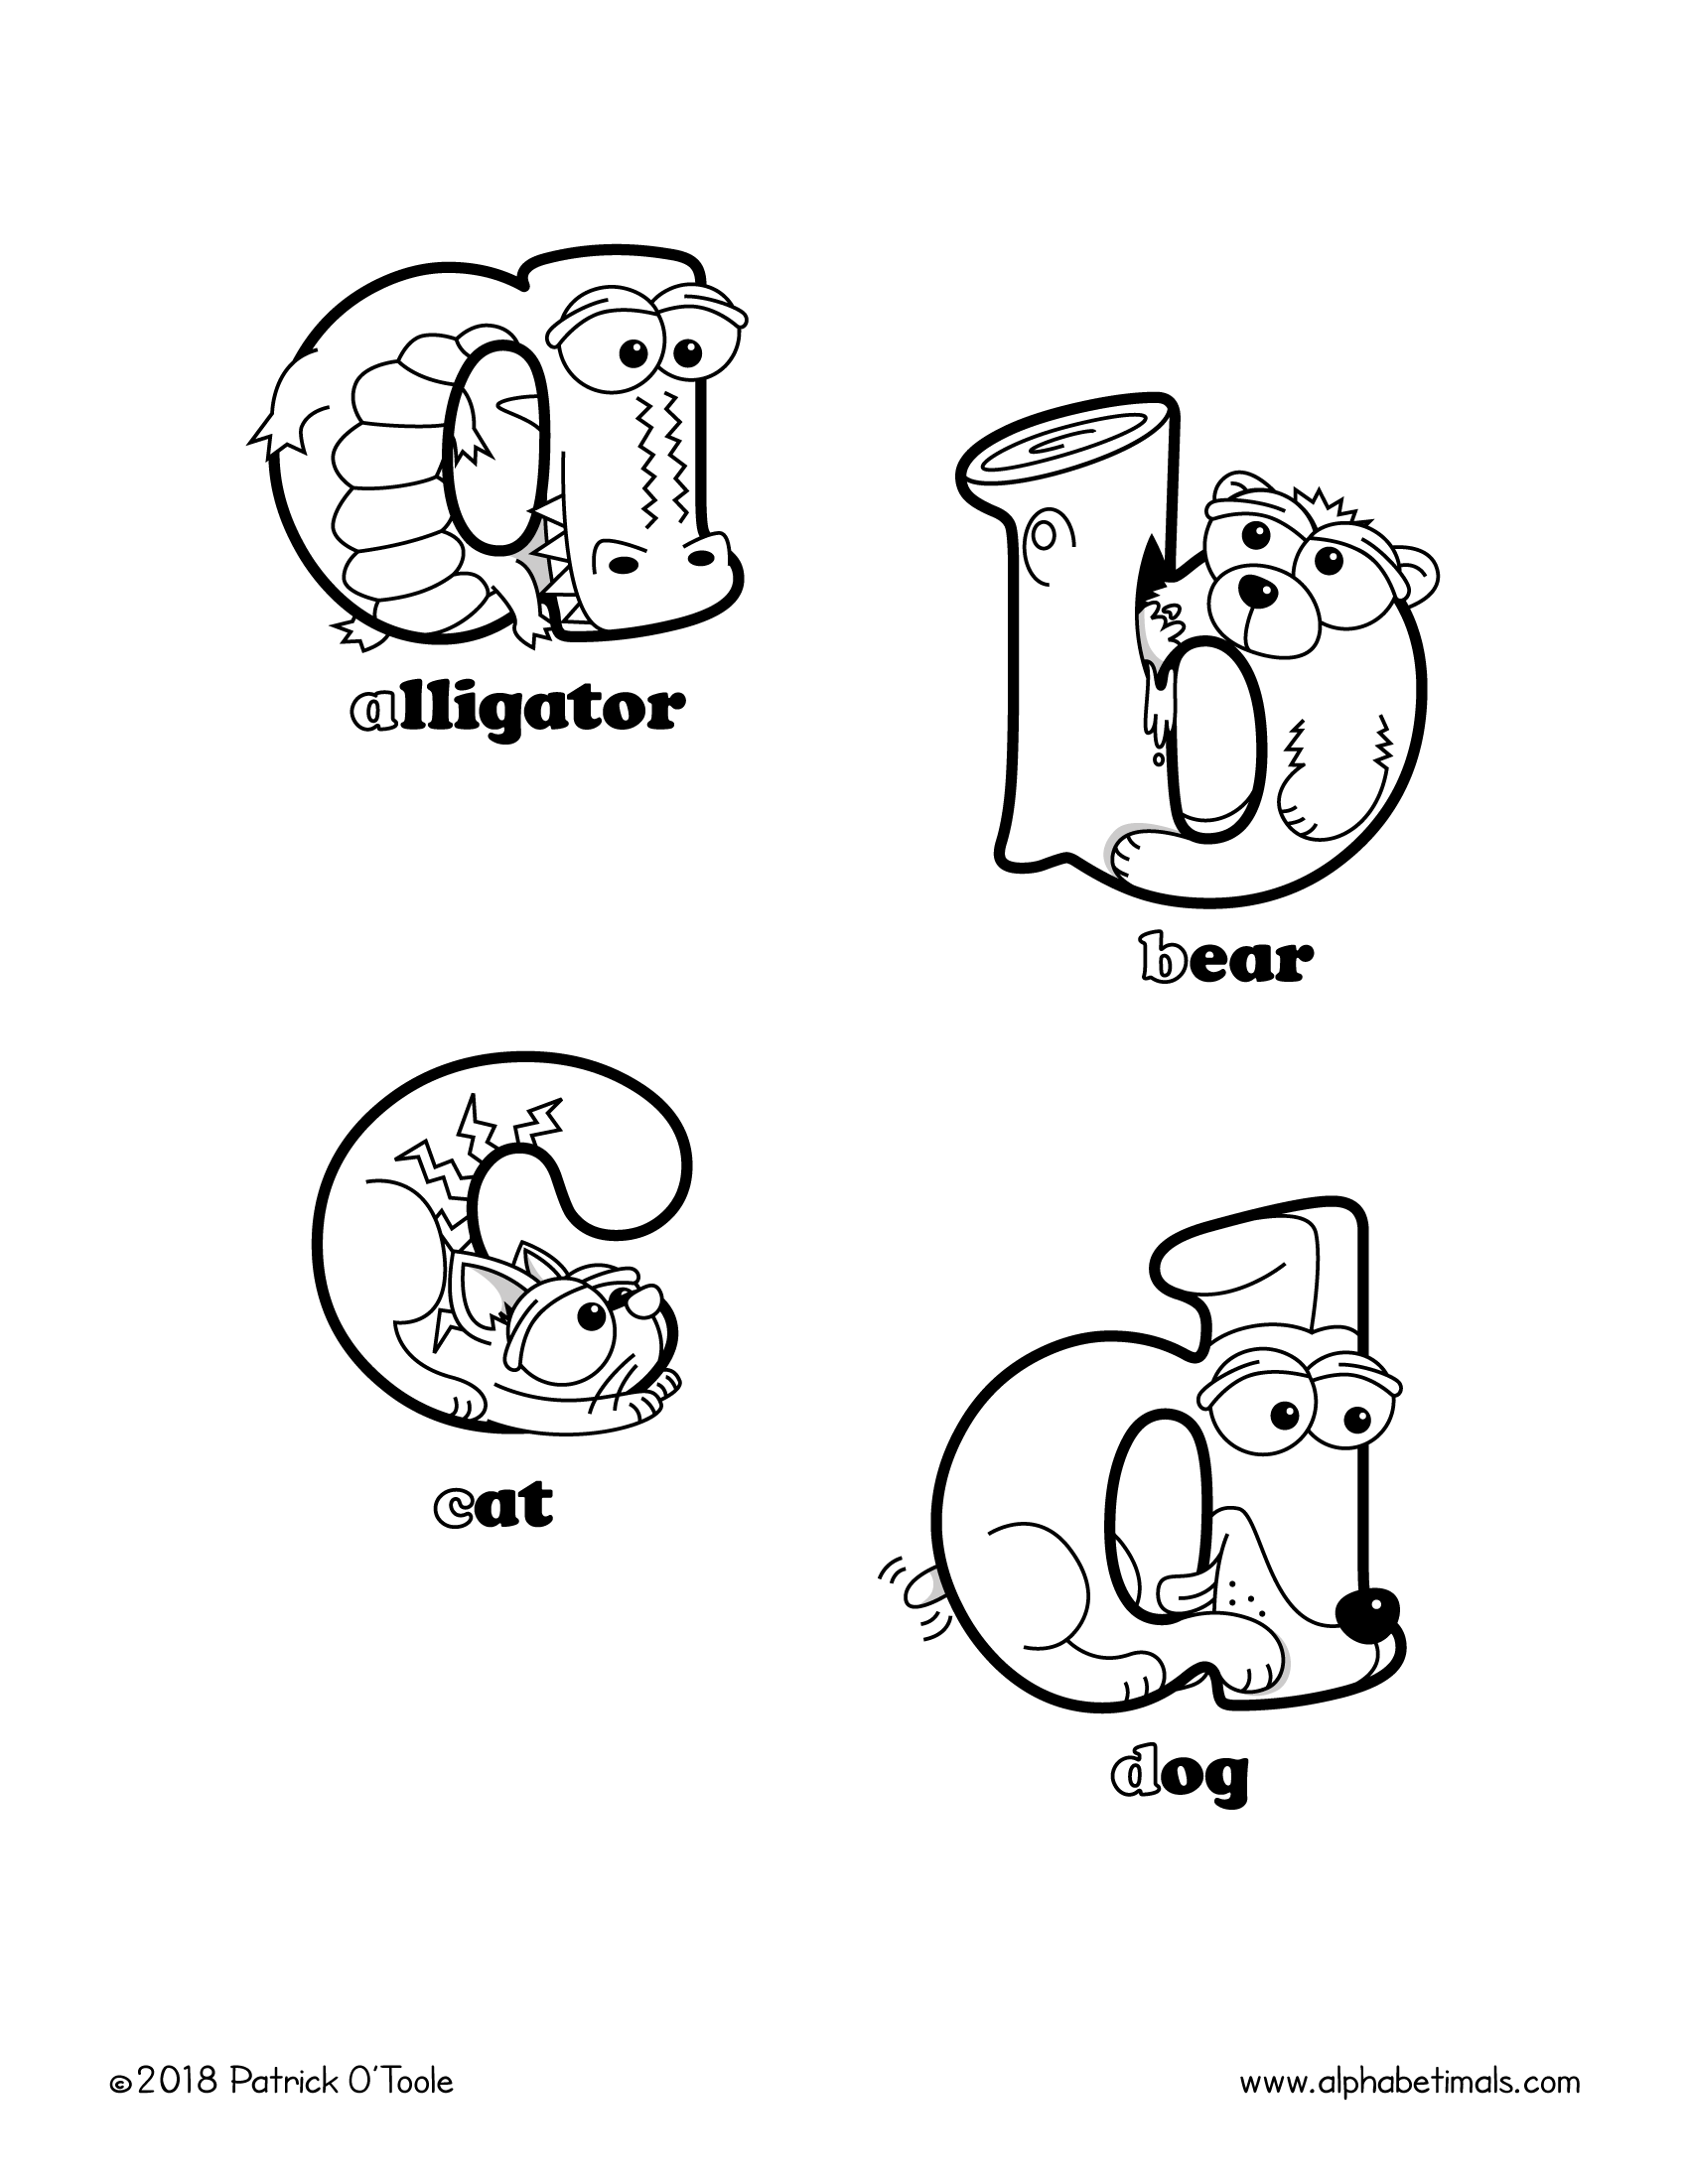 Alphabet Lore H, F coloring page - Download, Print or Color Online for Free